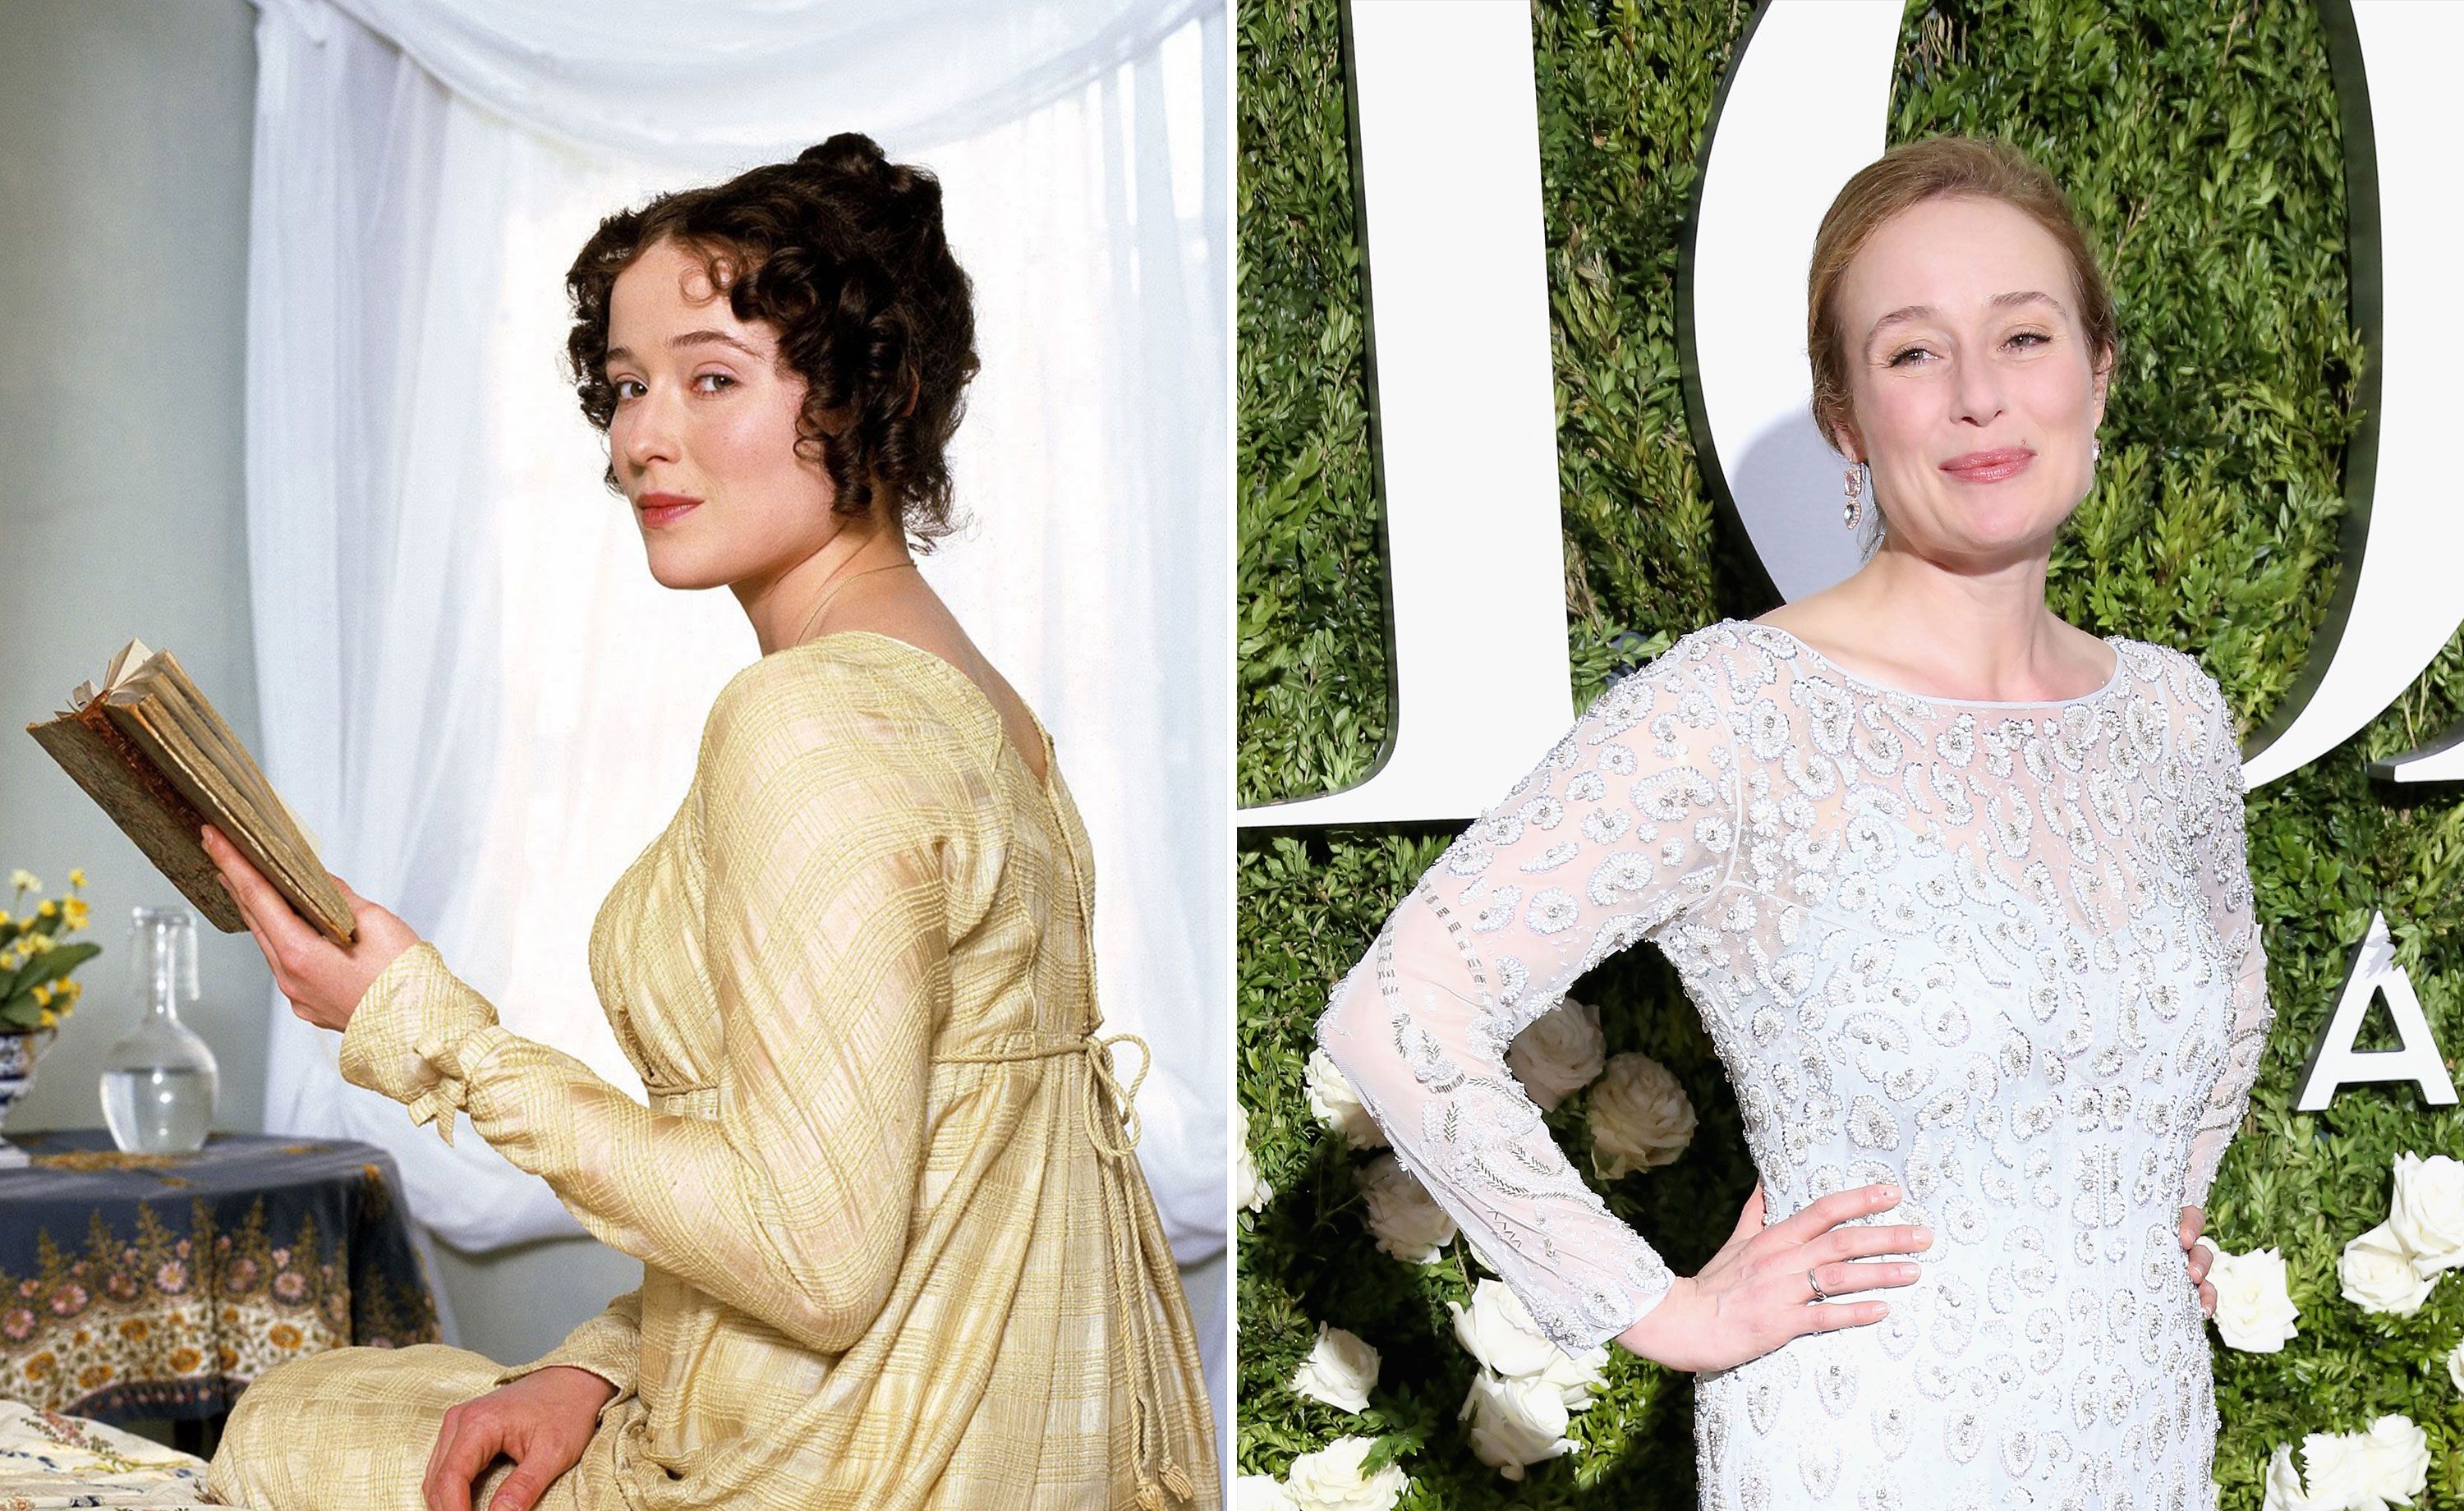 Pride and Prejudice aired 22 years pic